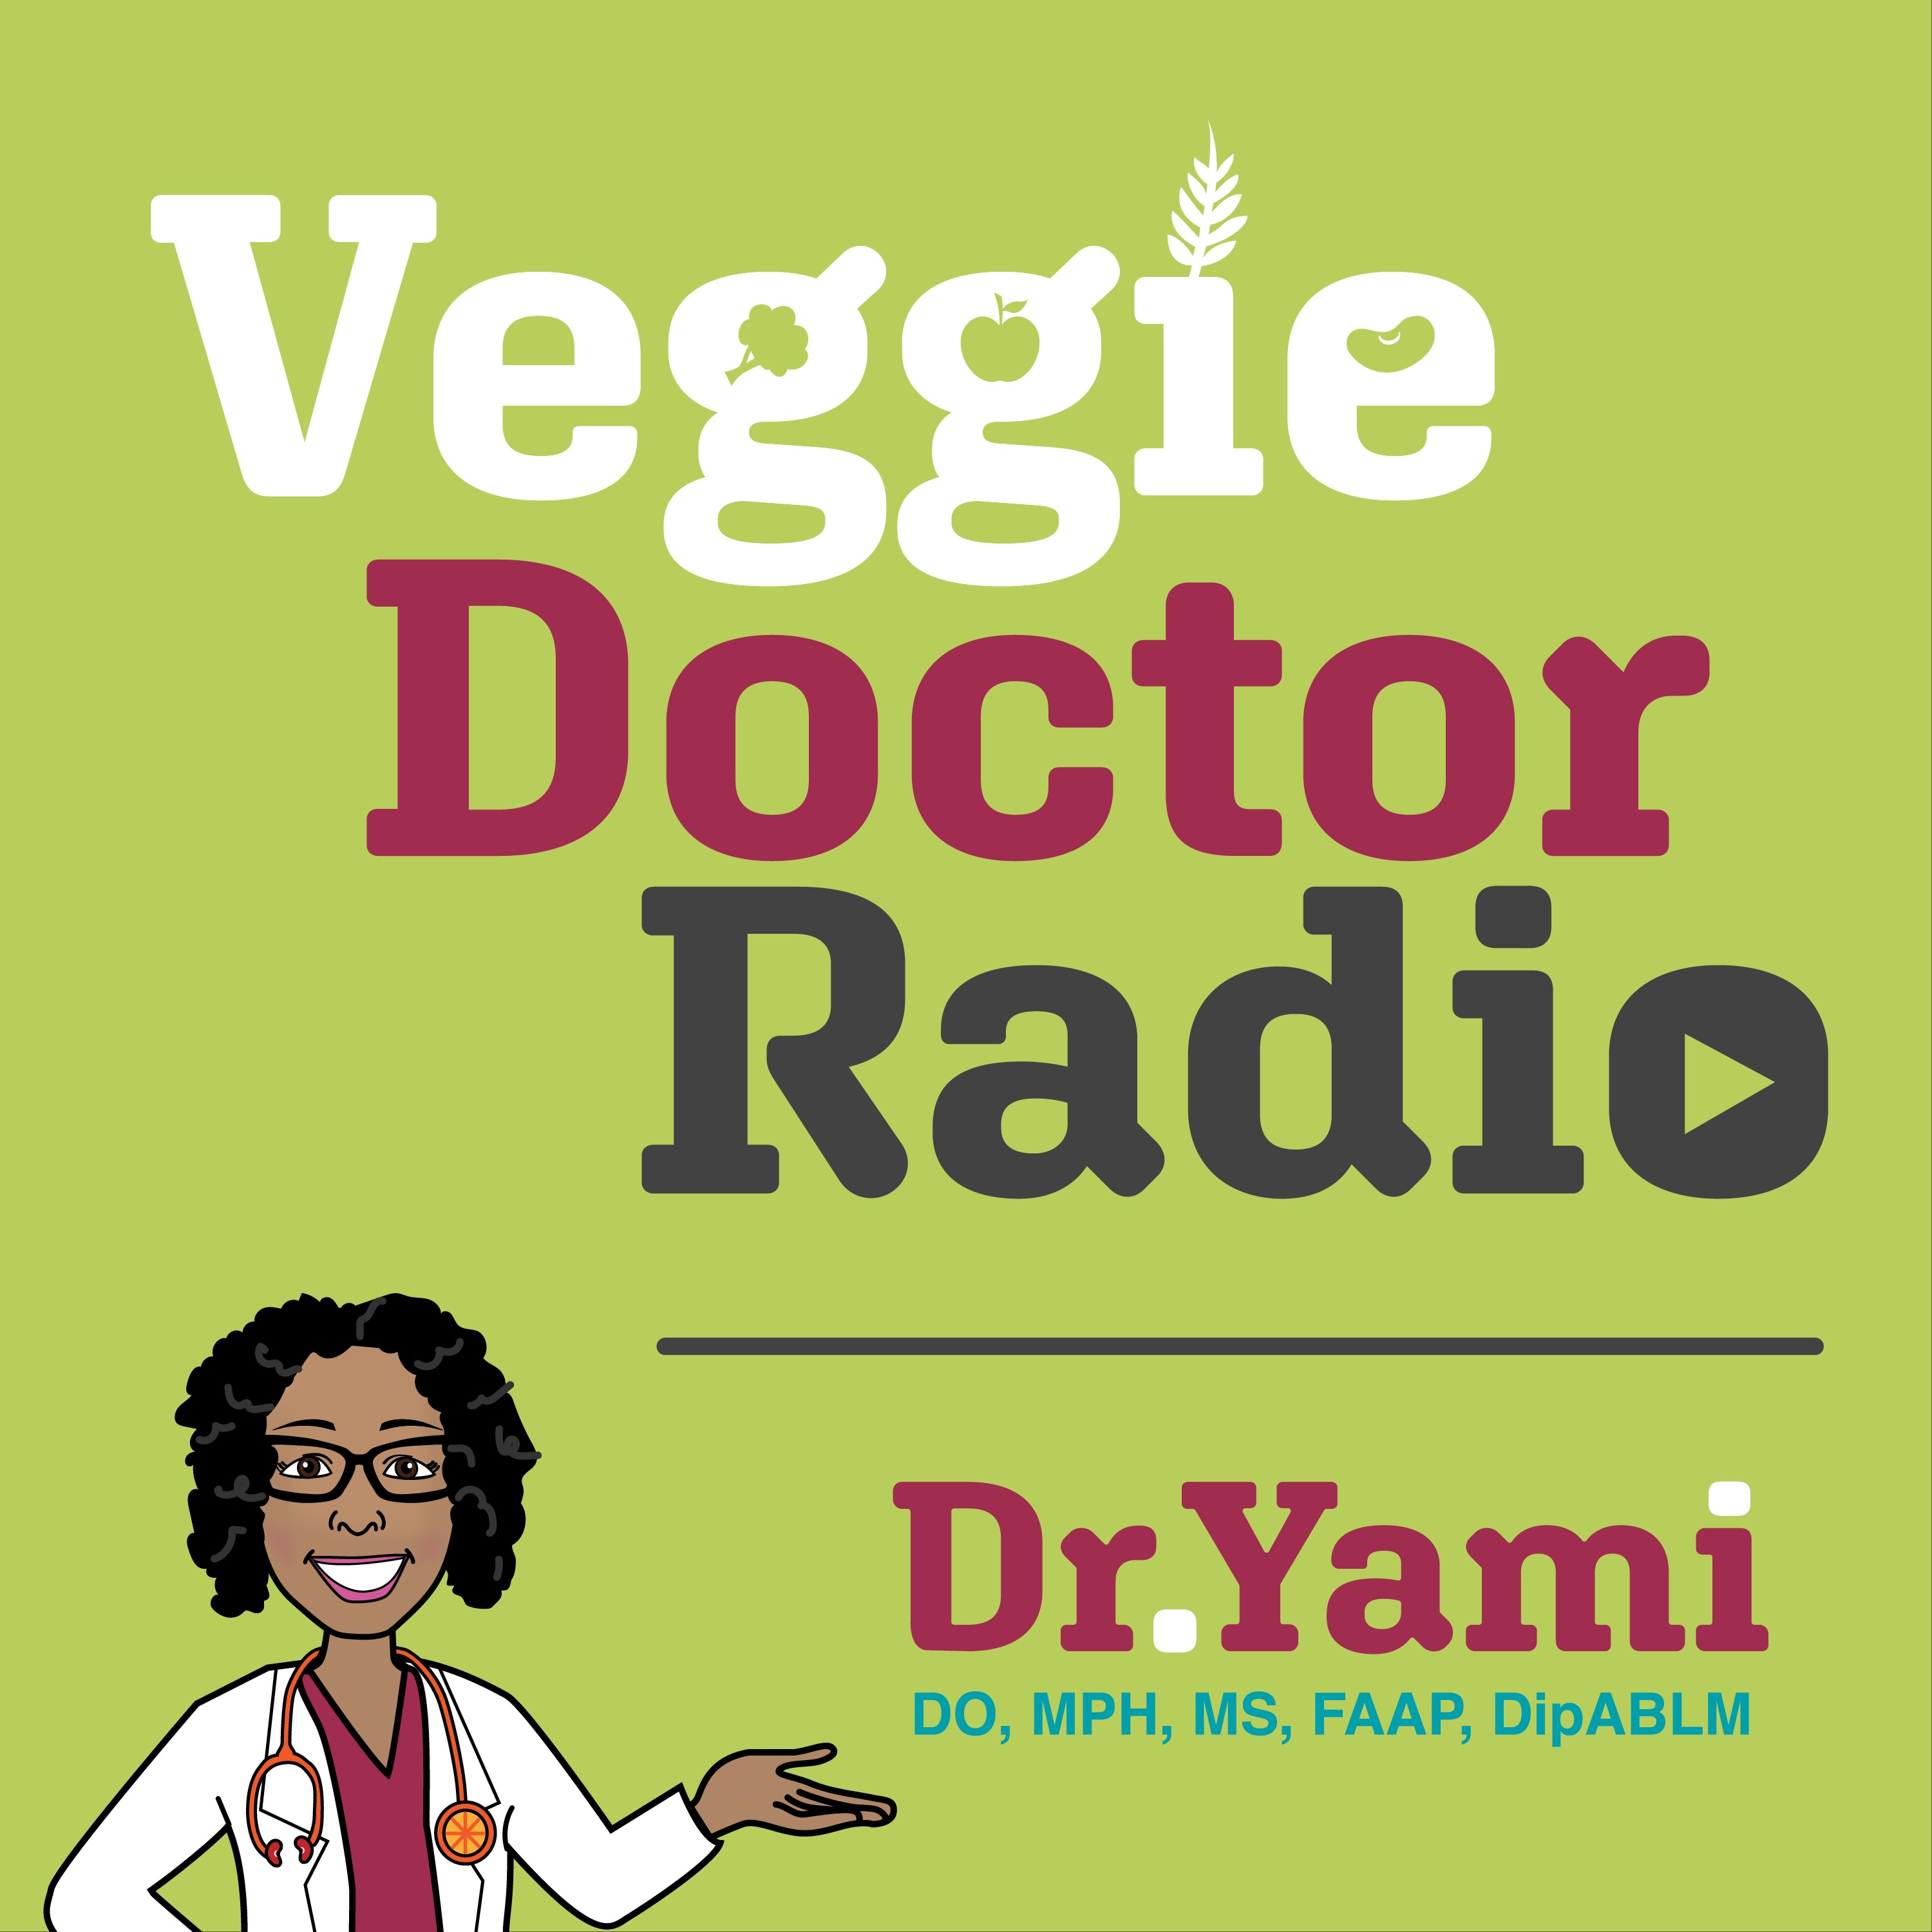 191: How to pack your child’s lunches from Pediatrician Dr. Anne Dudley (Veggie Doctor Radio)